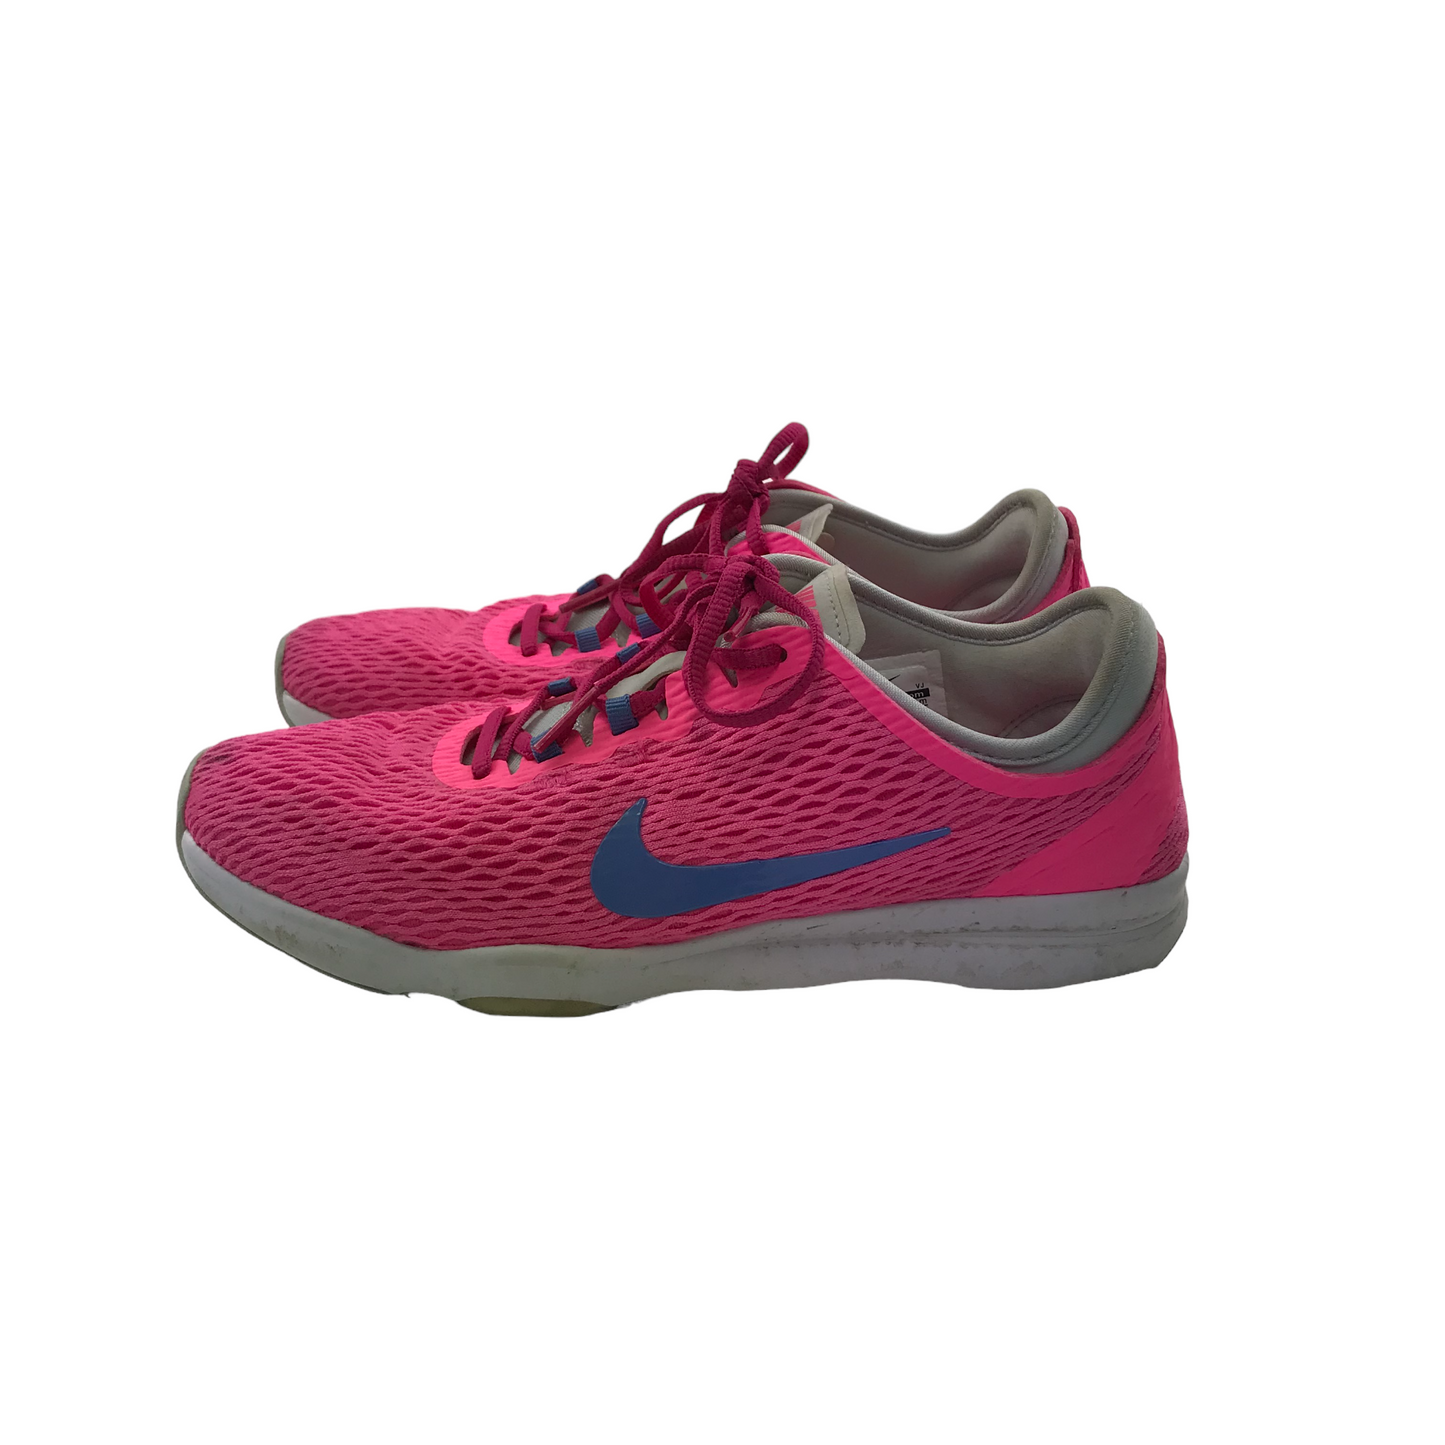 Nike Training Zoom Fit Pink Trainers Shoe Size 4